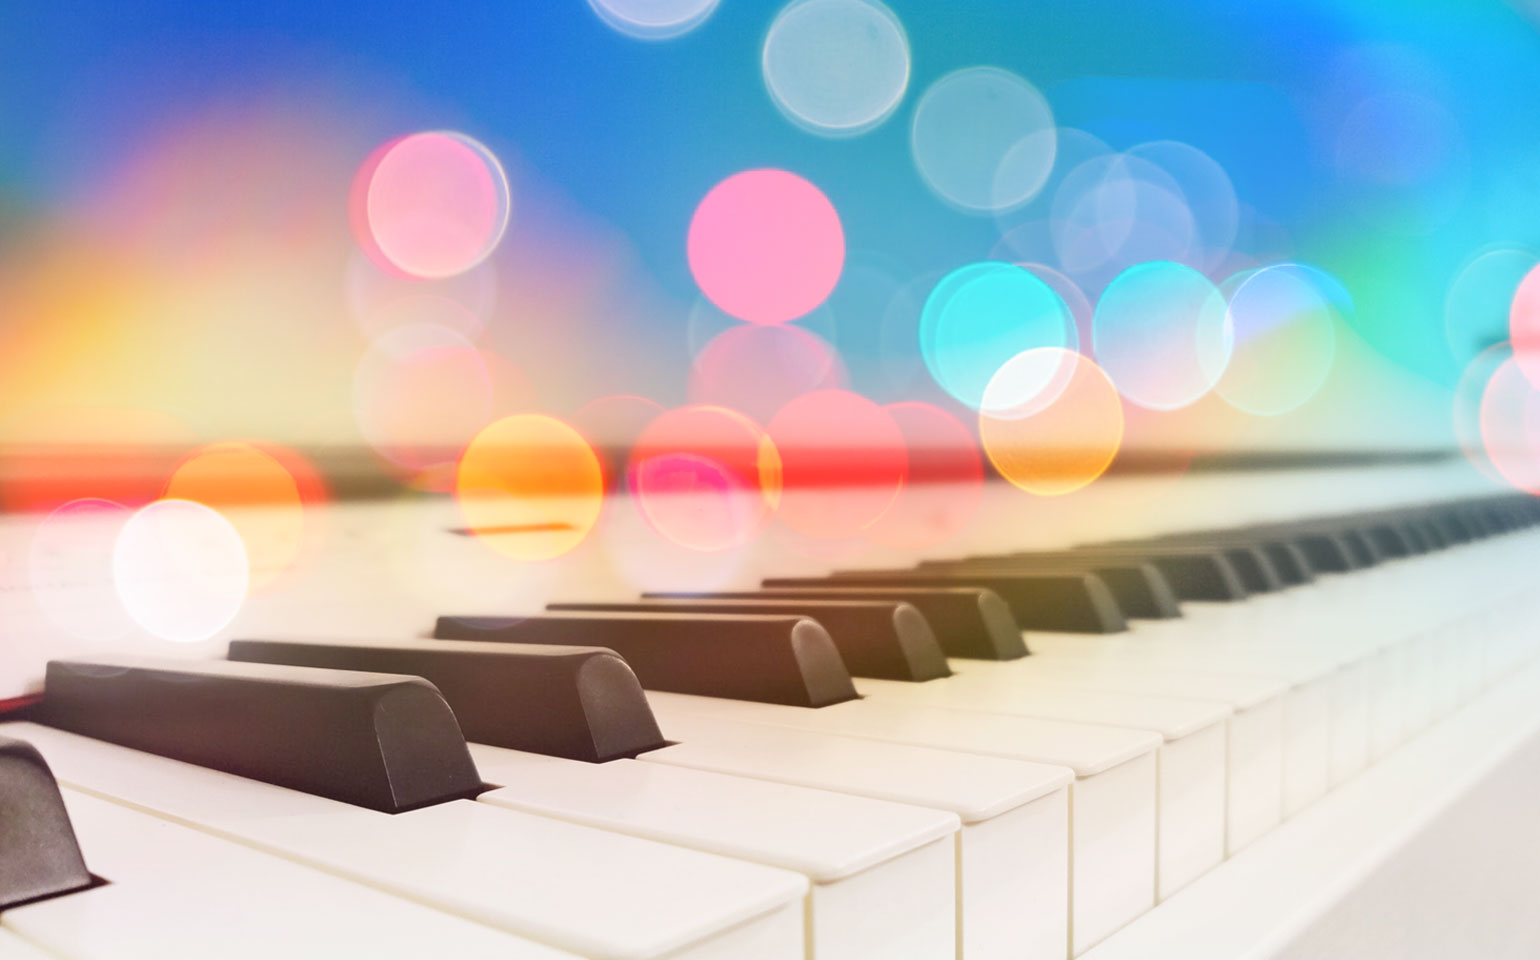 The ivory keys of a piano are shown with glowing lens flare spots above them.